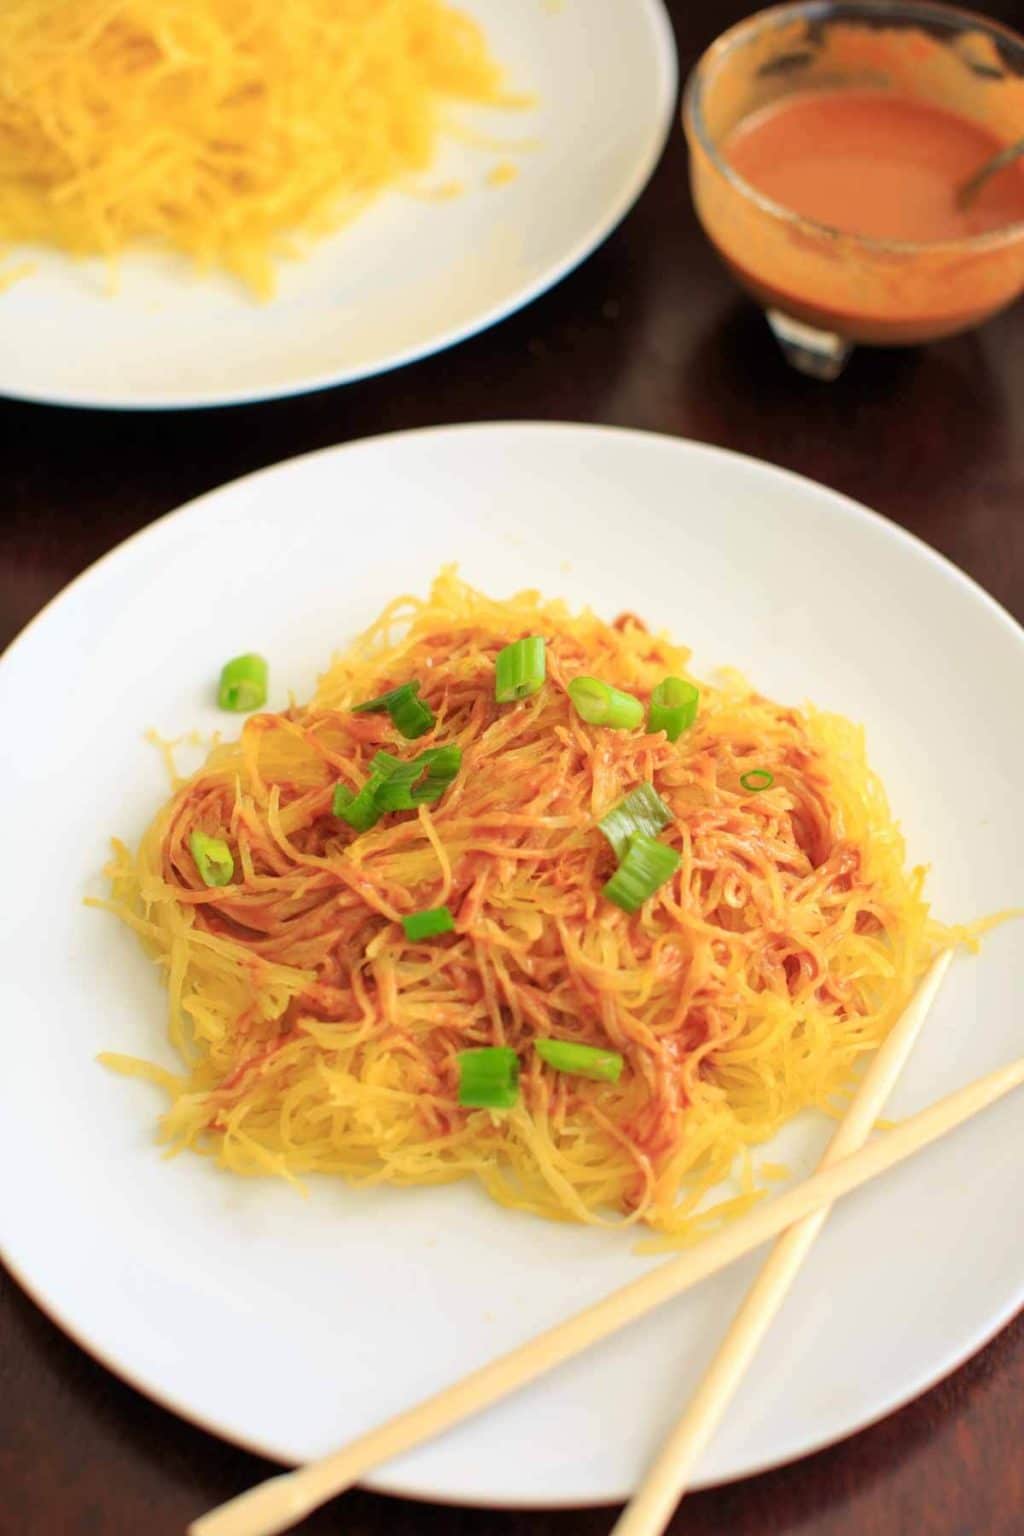 Spaghetti squash noodles with spicy peanut sauce make a delicious, gluten-free and vegan dinner that's easy to prepare!